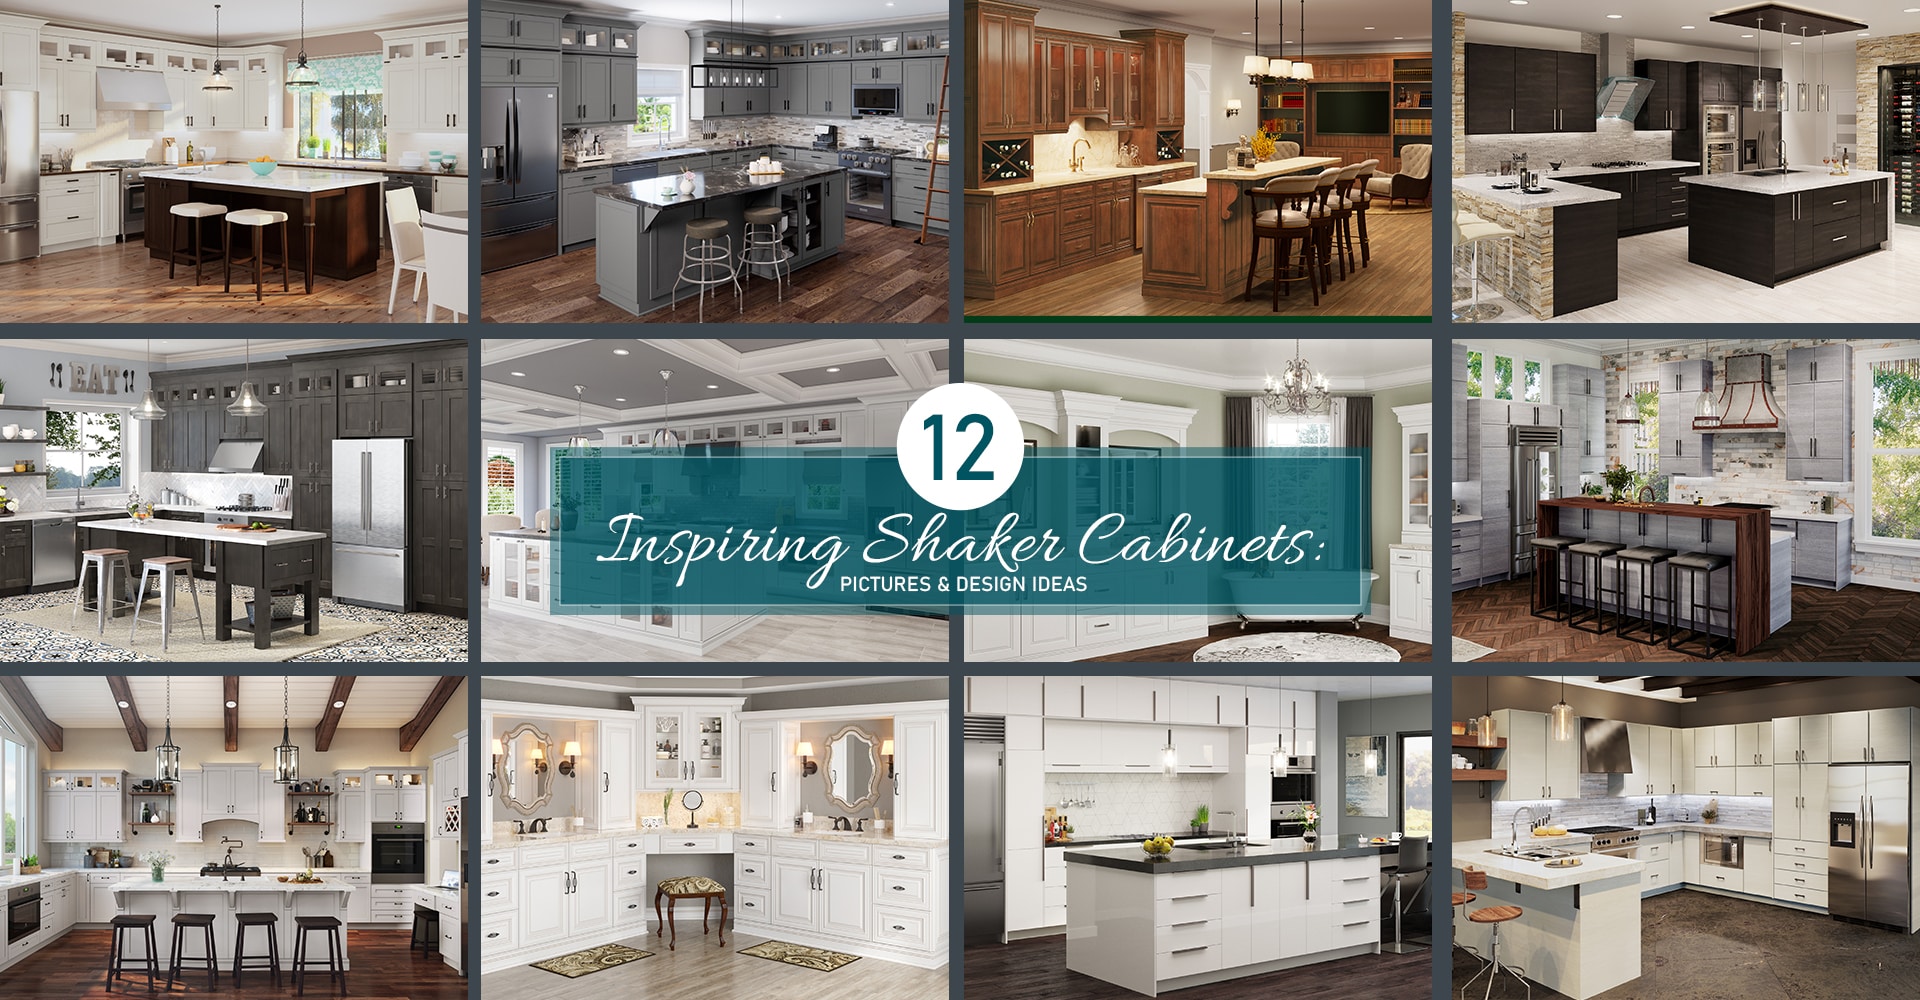 15 Popular Hardware Styles for Kitchens With Shaker Cabinets  Kitchen  cabinet design, Kitchen renovation, White shaker kitchen cabinets